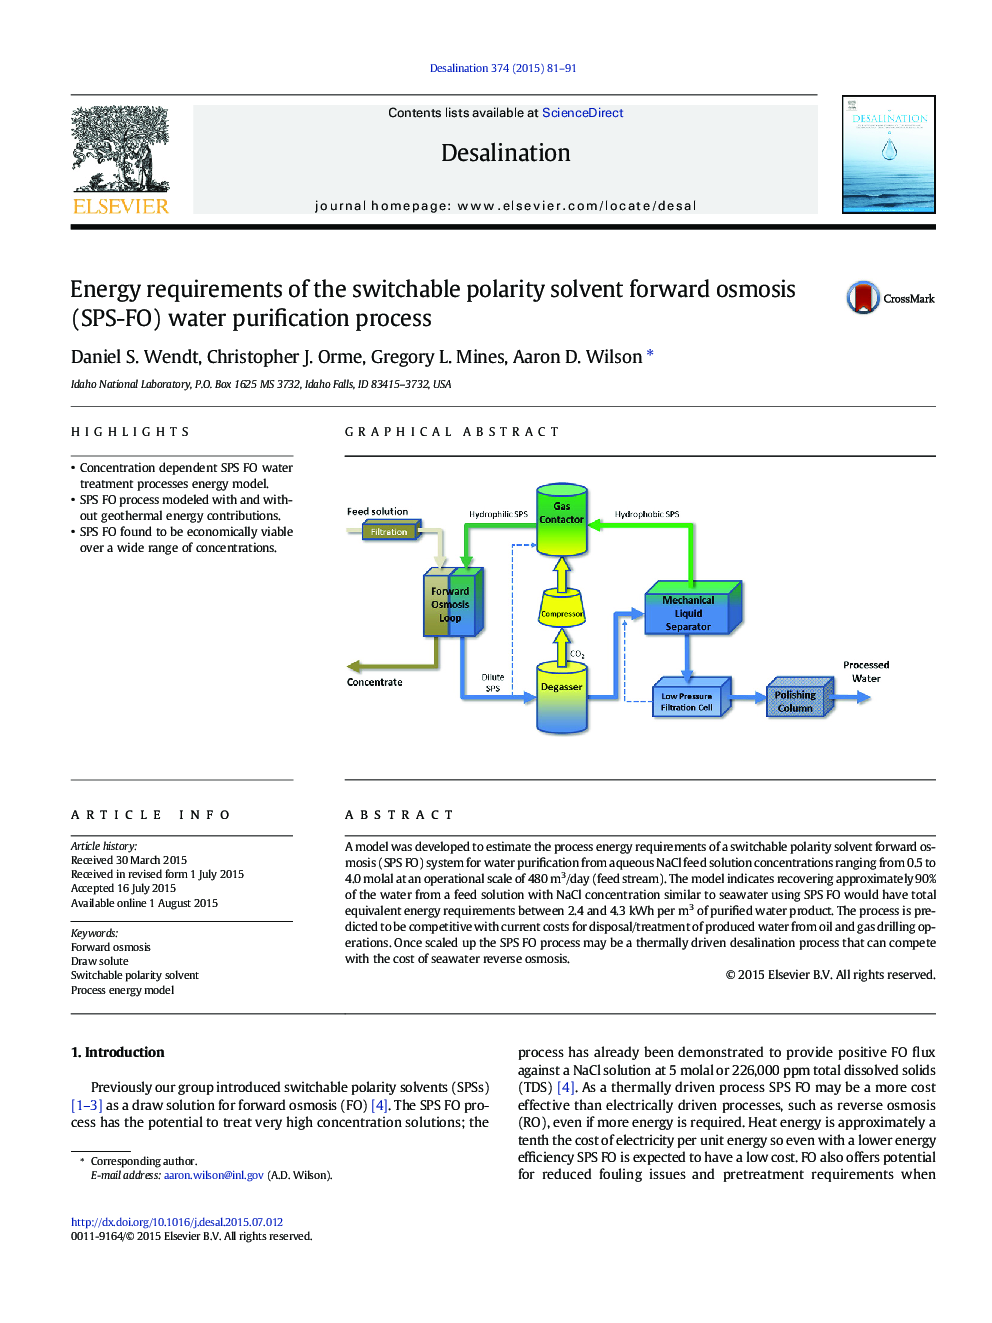 Energy requirements of the switchable polarity solvent forward osmosis (SPS-FO) water purification process